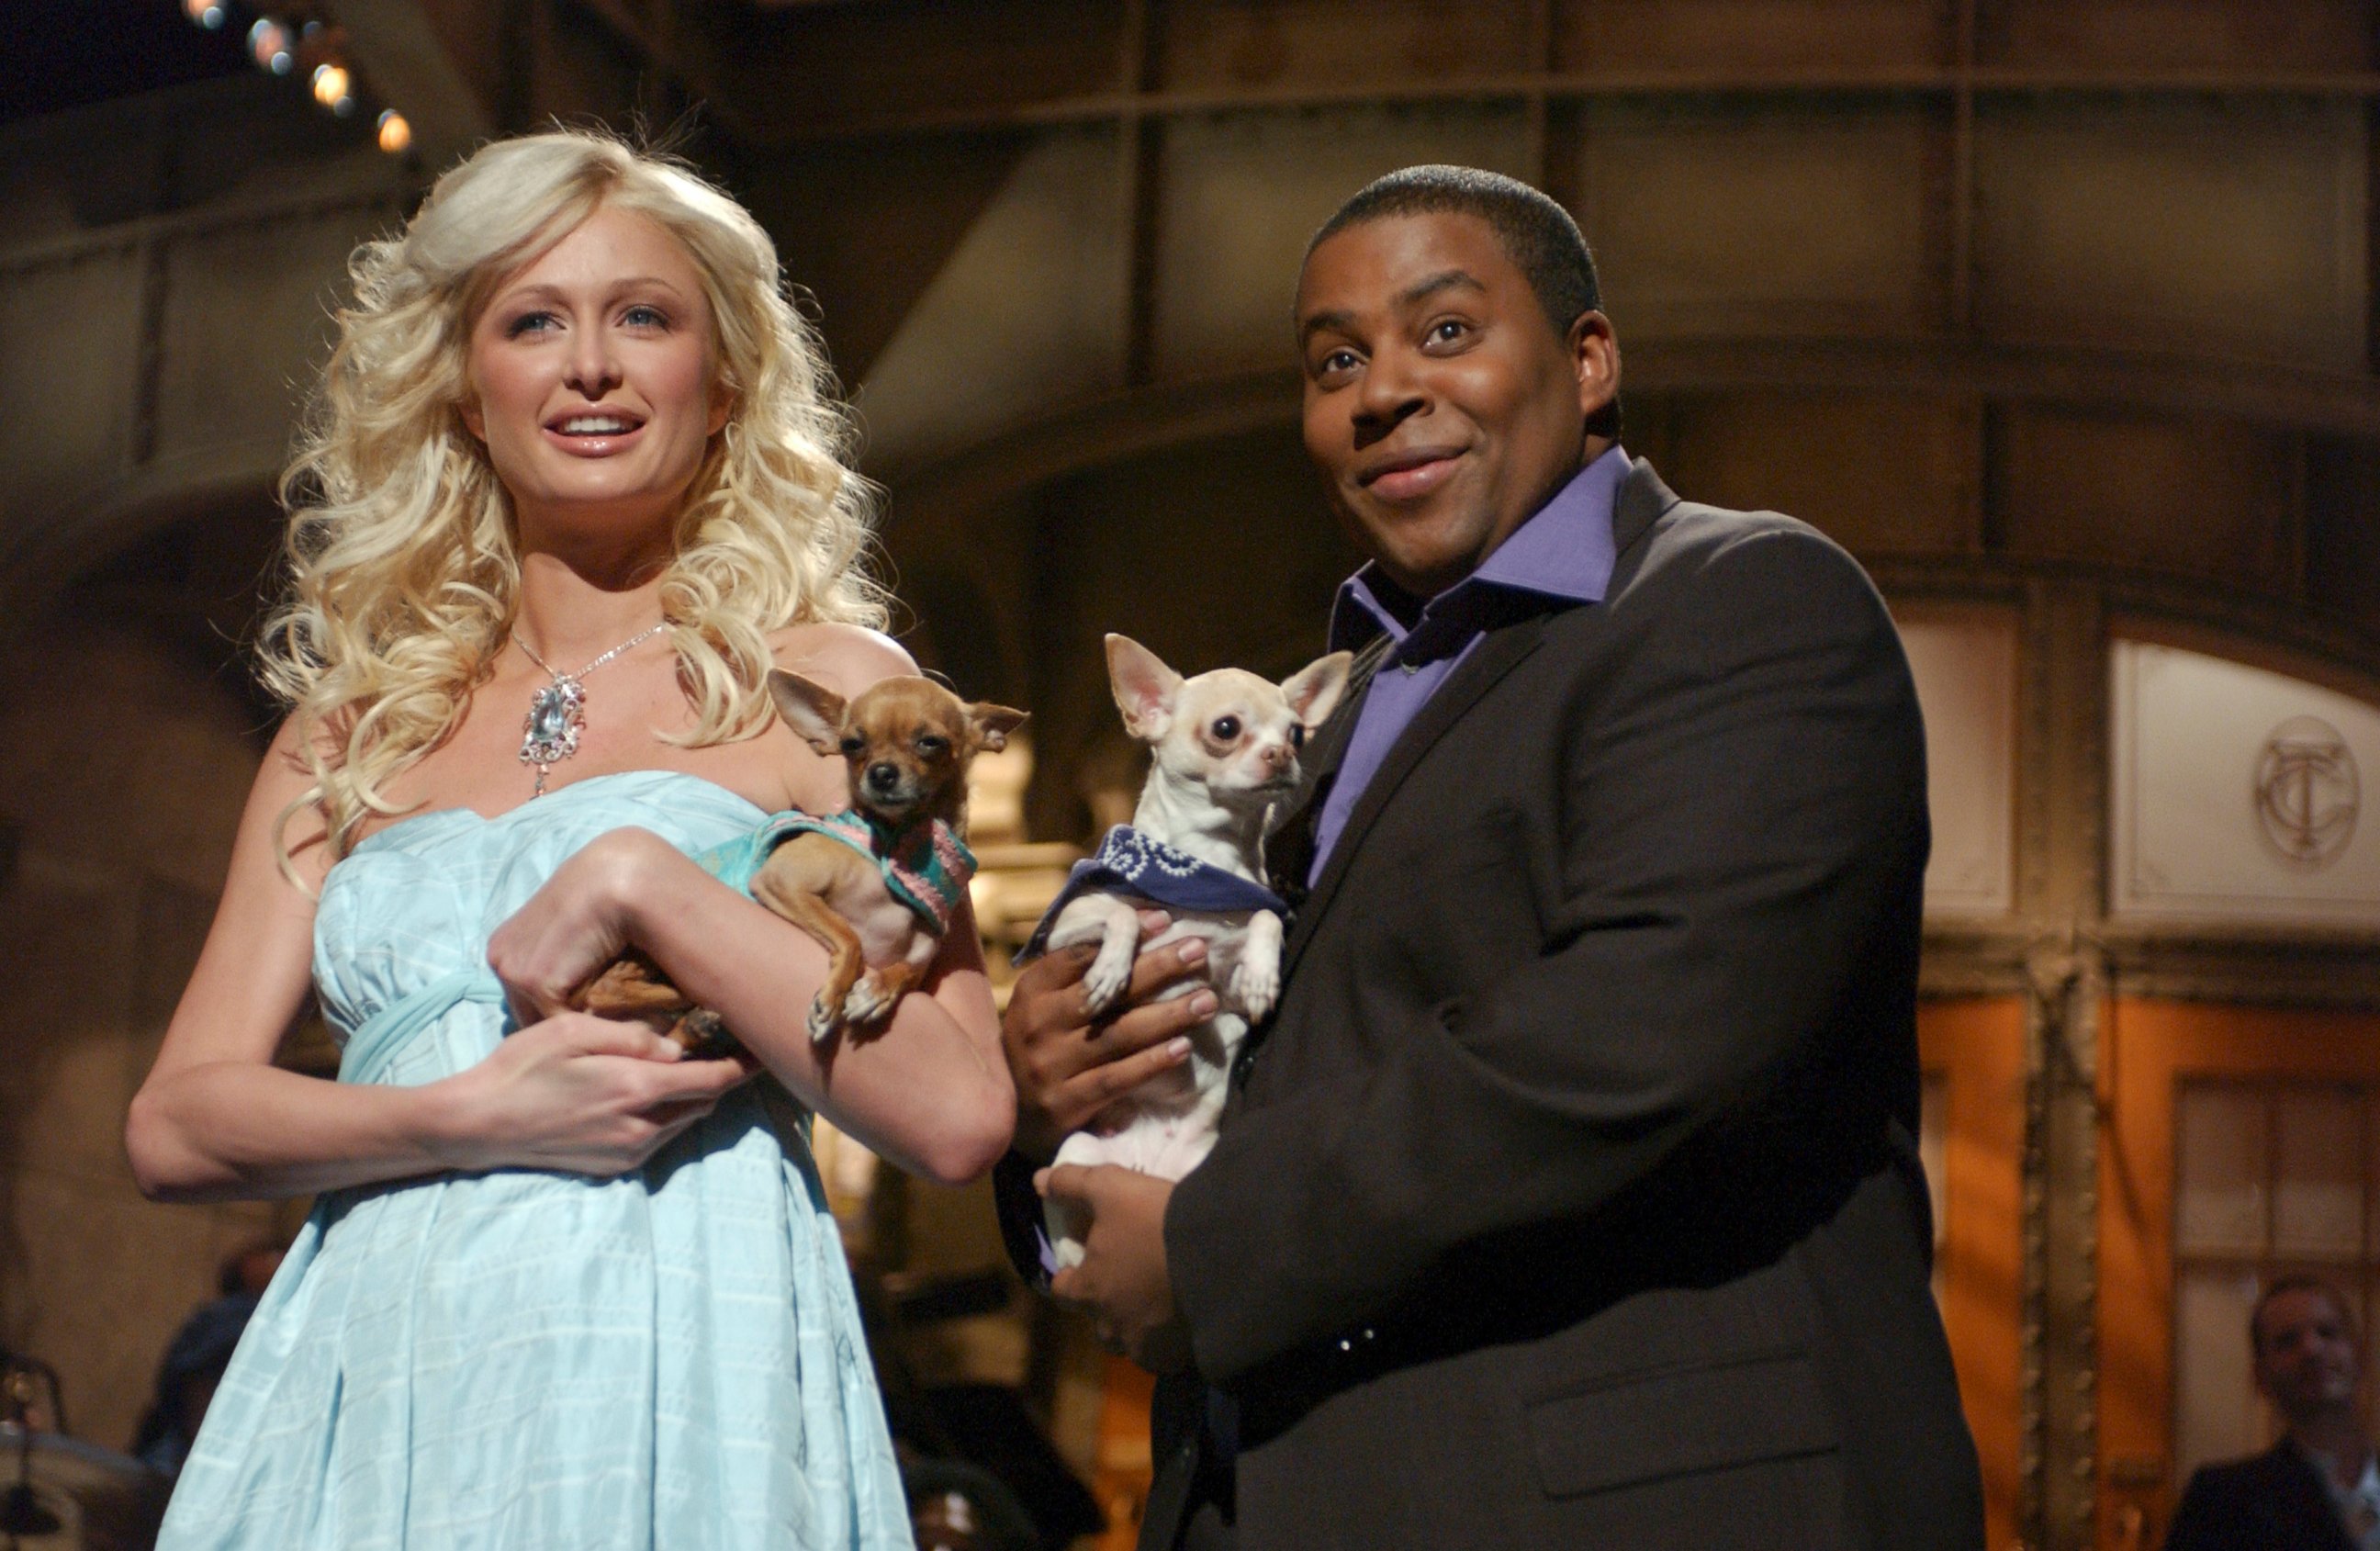 PHOTO: Paris Hilton and Tinkerbell are seen with Kenan Tompson for a Feb. 2, 2005 episode of "Saturday Night Live."